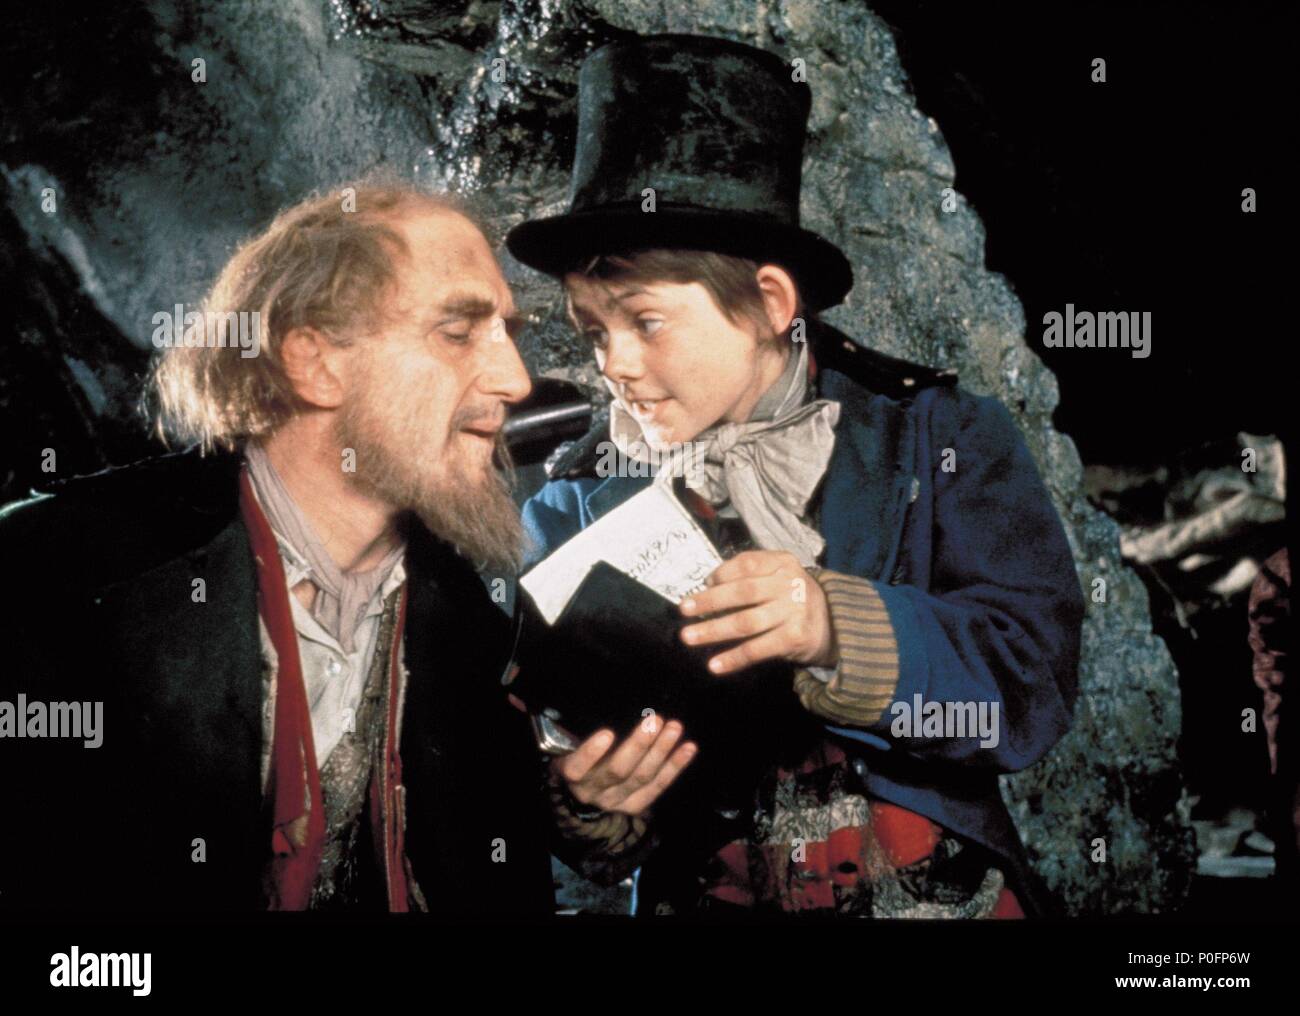 Original Film Title: OLIVER!.  English Title: OLIVER!.  Film Director: CAROL REED.  Year: 1968.  Stars: RON MOODY; JACK WILD. Credit: COLUMBIA PICTURES / Album Stock Photo